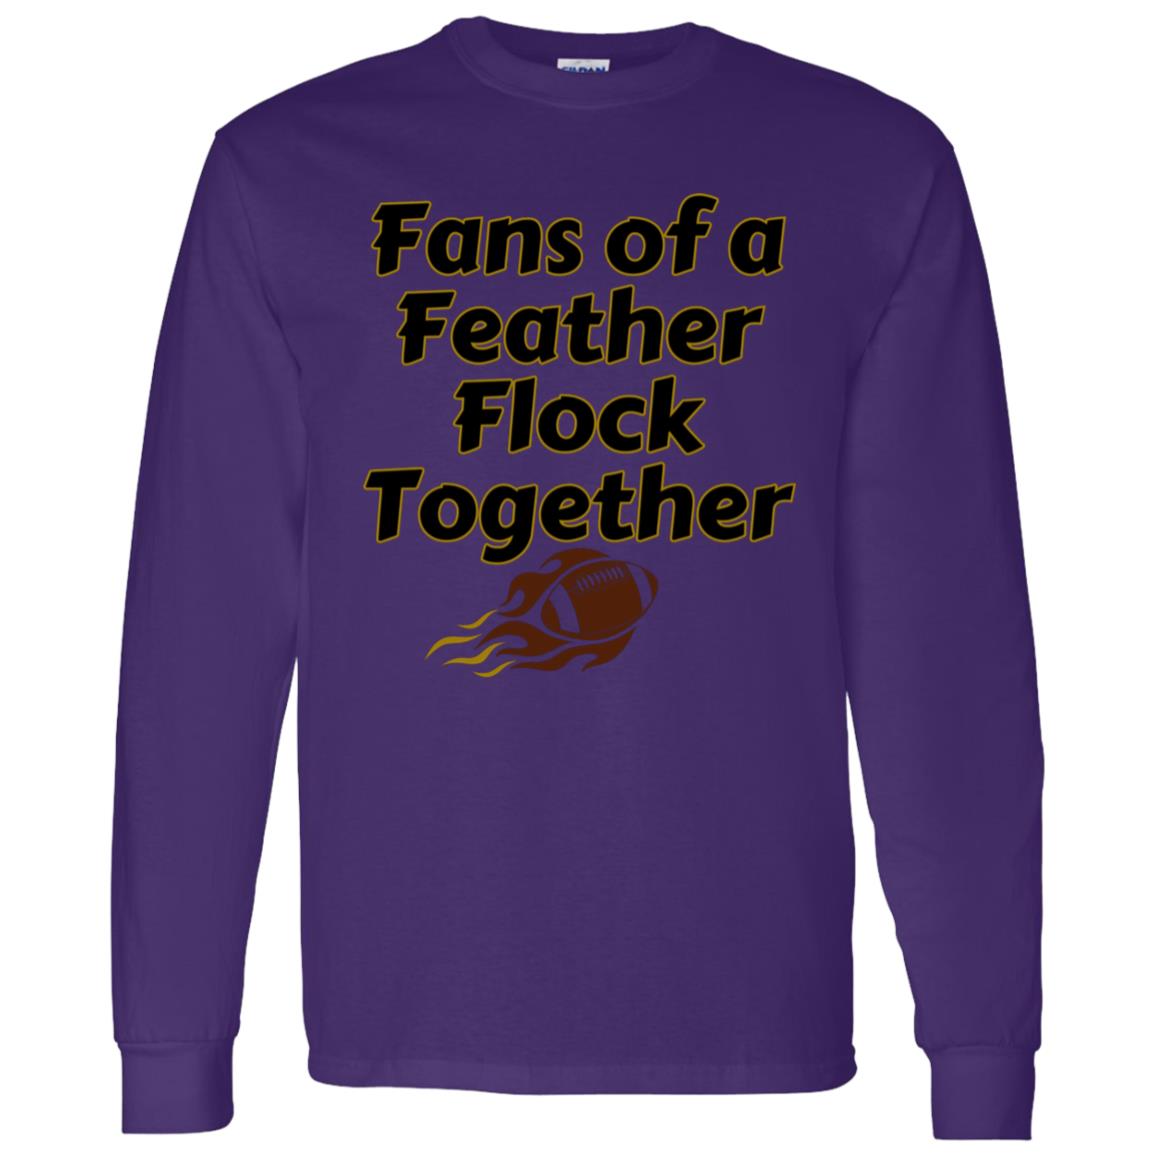 Fans of a Feather Flock Together Long Sleeve TShirt | Baltimore Sports Shirt